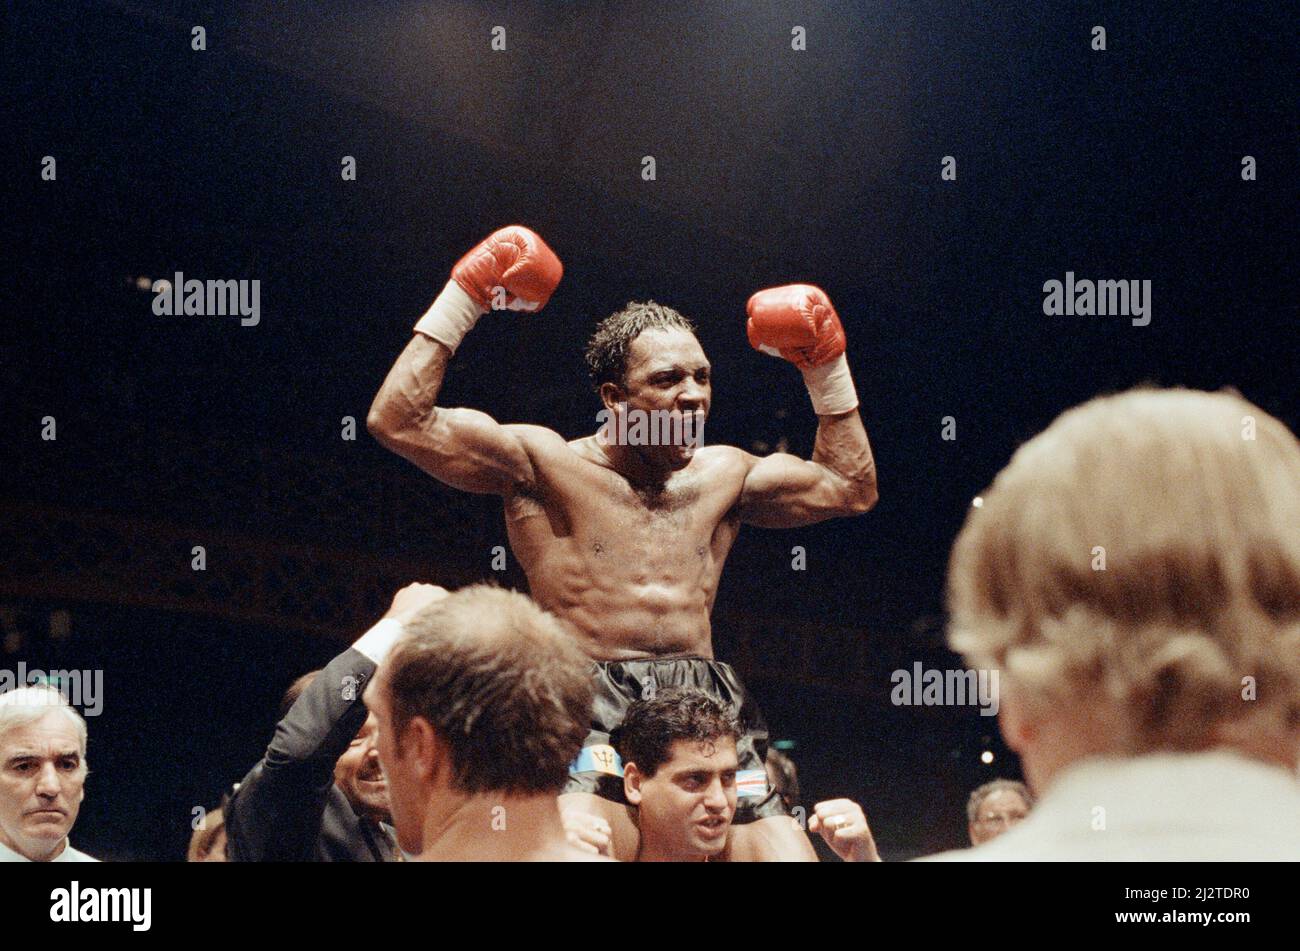 WBC super-middleweight title, Nigel Benn vs Lou Gent. Earls Court Exhibition Centre, London, England.Benn stopped his opponent in the 4th round by TKO to retain his WBC super-middleweight belt. 26th June 1993 Stock Photo